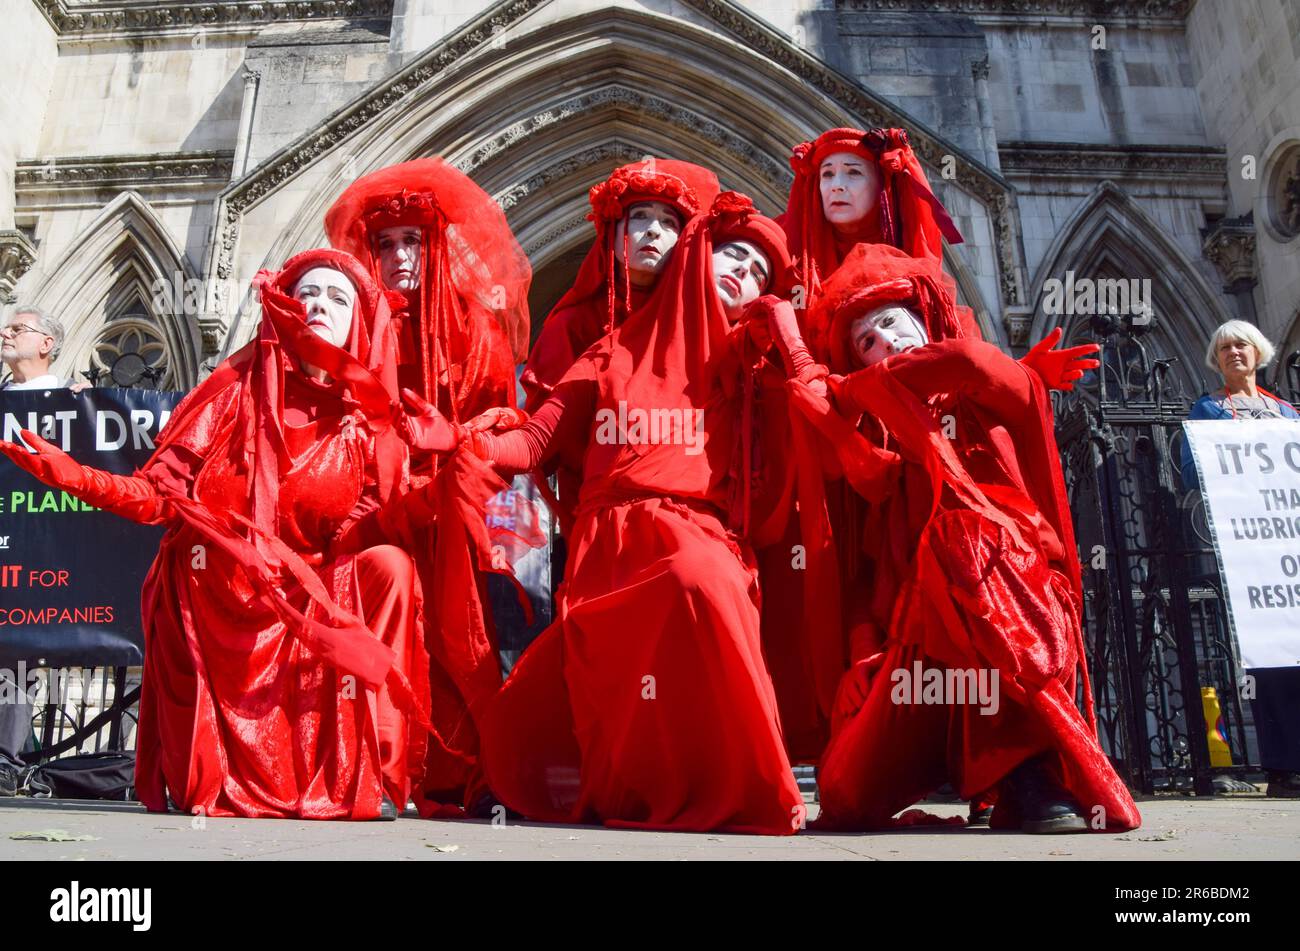 Extinction Rebellion protesters wearing red costumes, known as the Red Rebel Brigade, perform during the demonstration. Climate protesters gathered outside the Royal Courts of Justice during the judicial review of the planning permission for UK Oil And Gas to explore for fossil fuels near the village of Dunsfold. (Photo by Vuk Valcic / SOPA Images/Sipa USA) Stock Photo